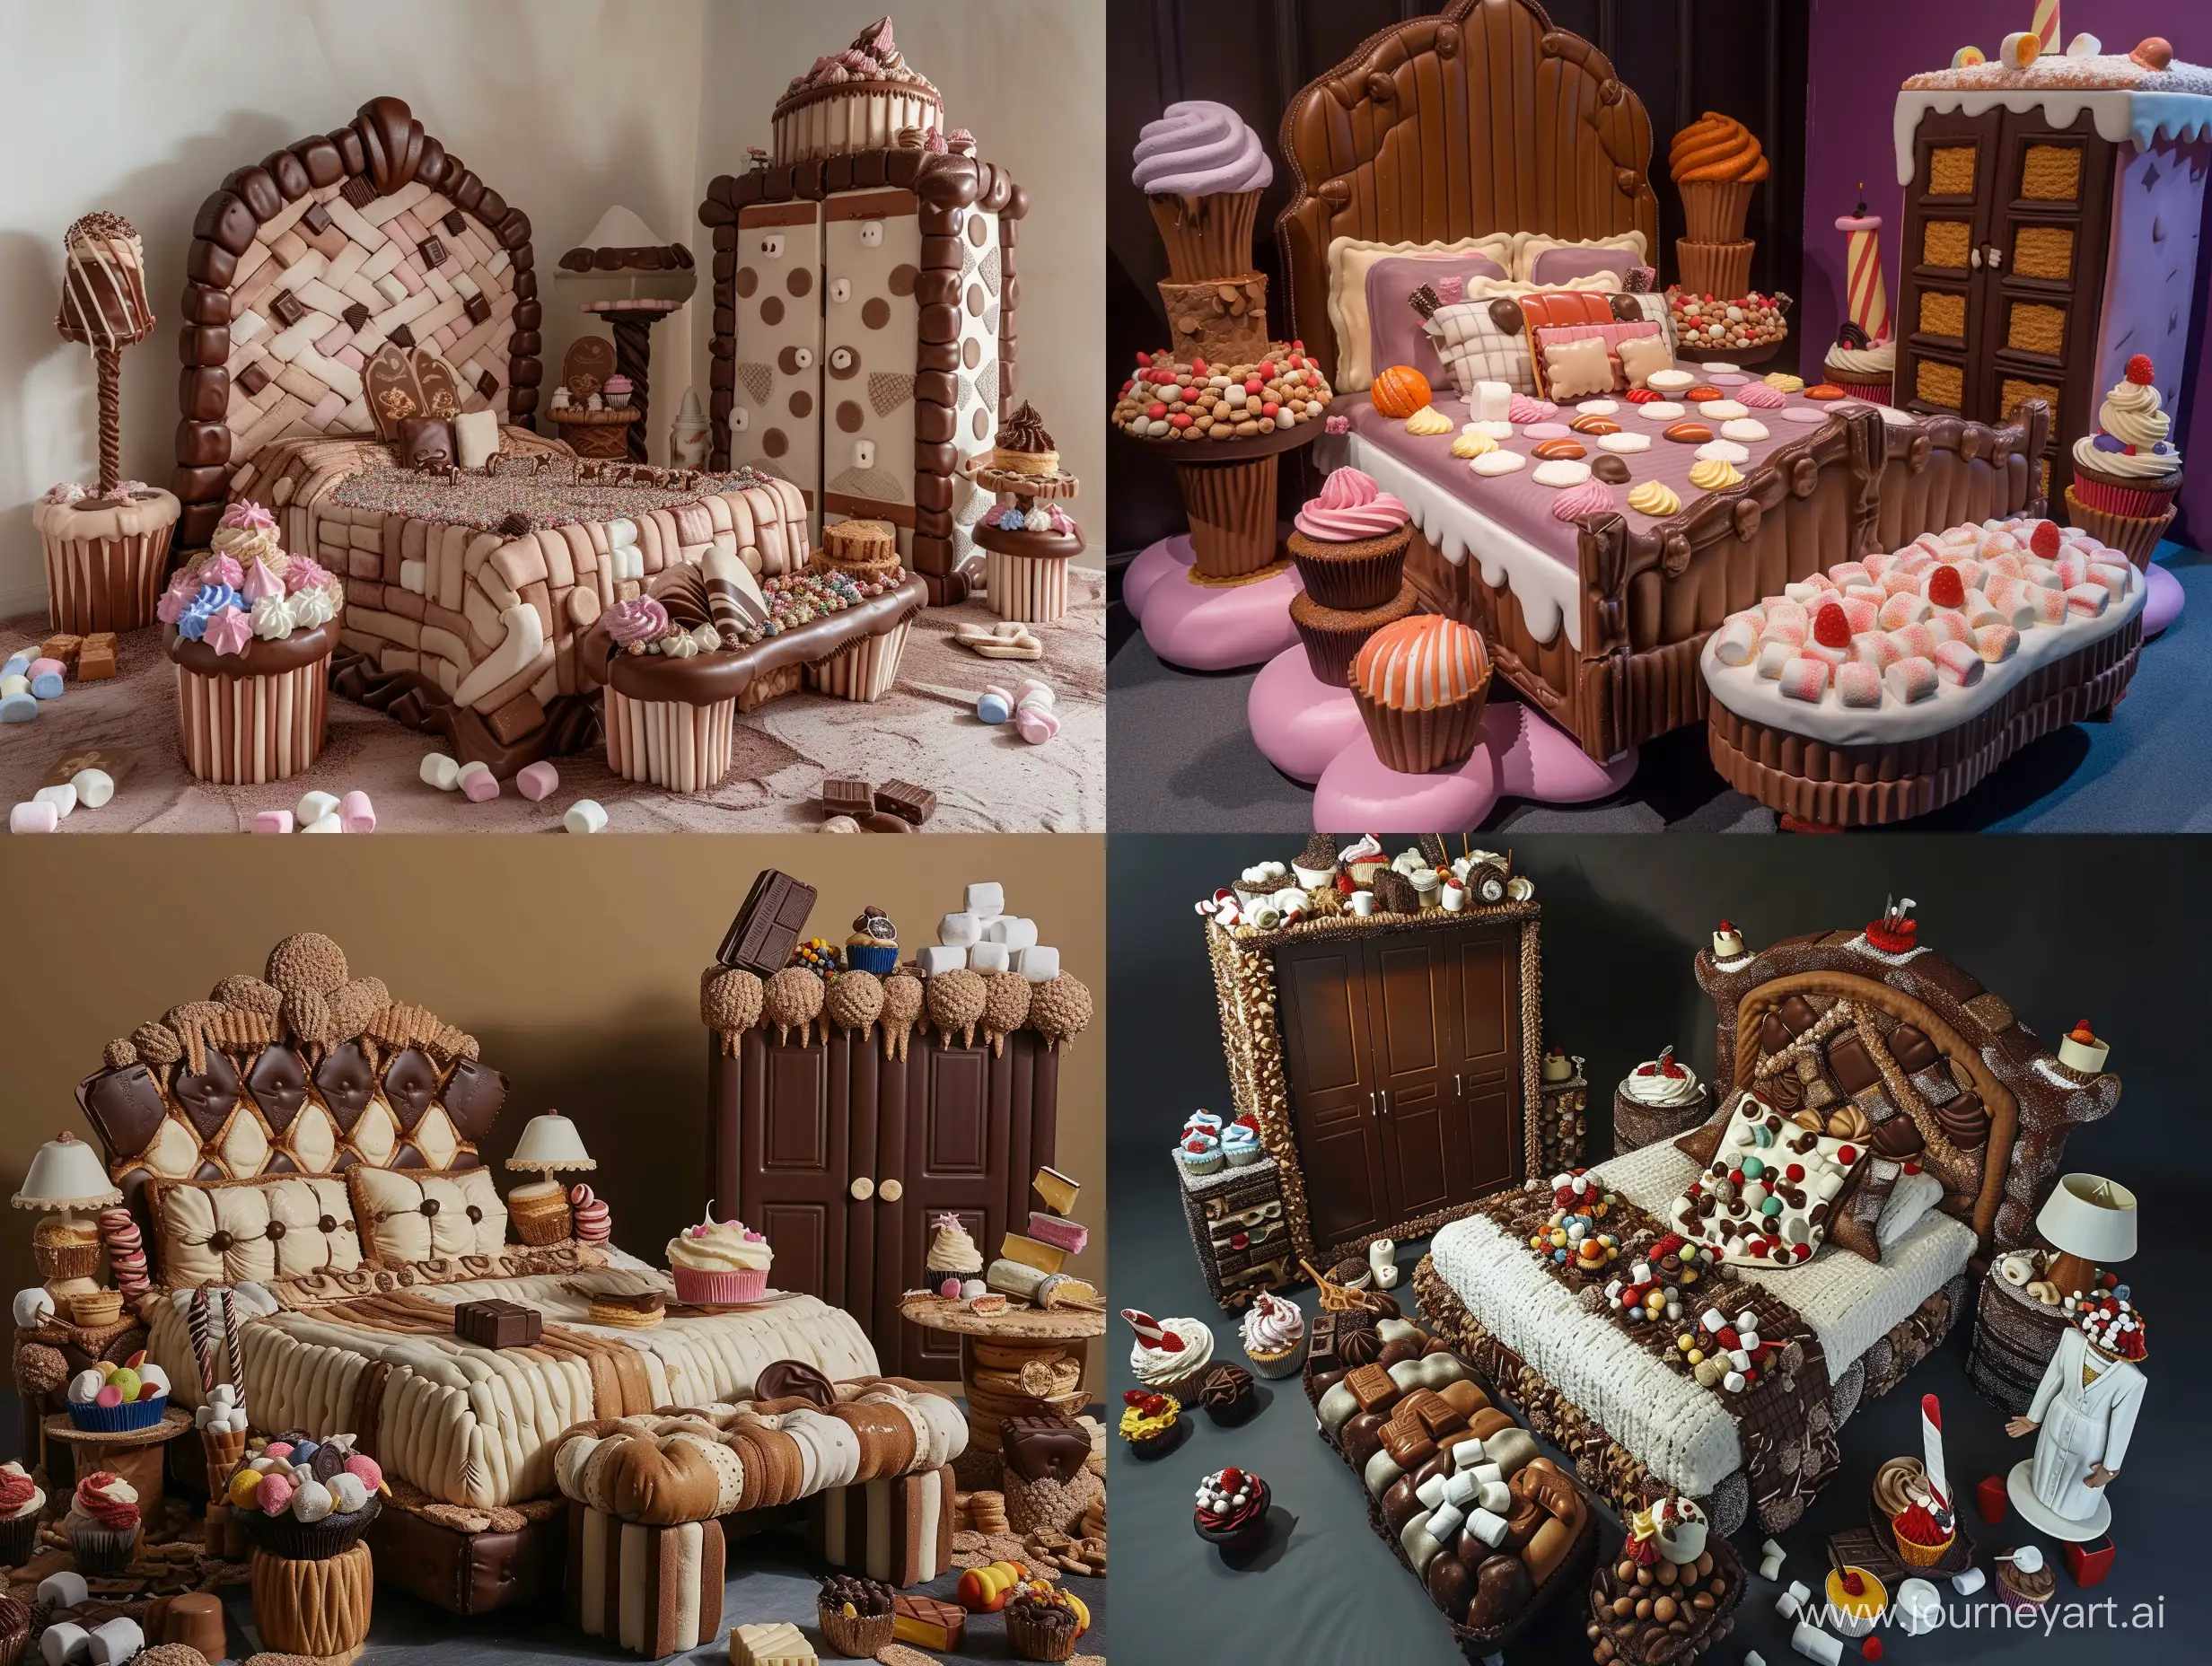 bedroom made up of desserts, chocolates, cupcakes, cakes, marshmallows, ice-creams, dessert bed, side-tables, bed-bench, wardrobe, all made out of desserts and baking goods